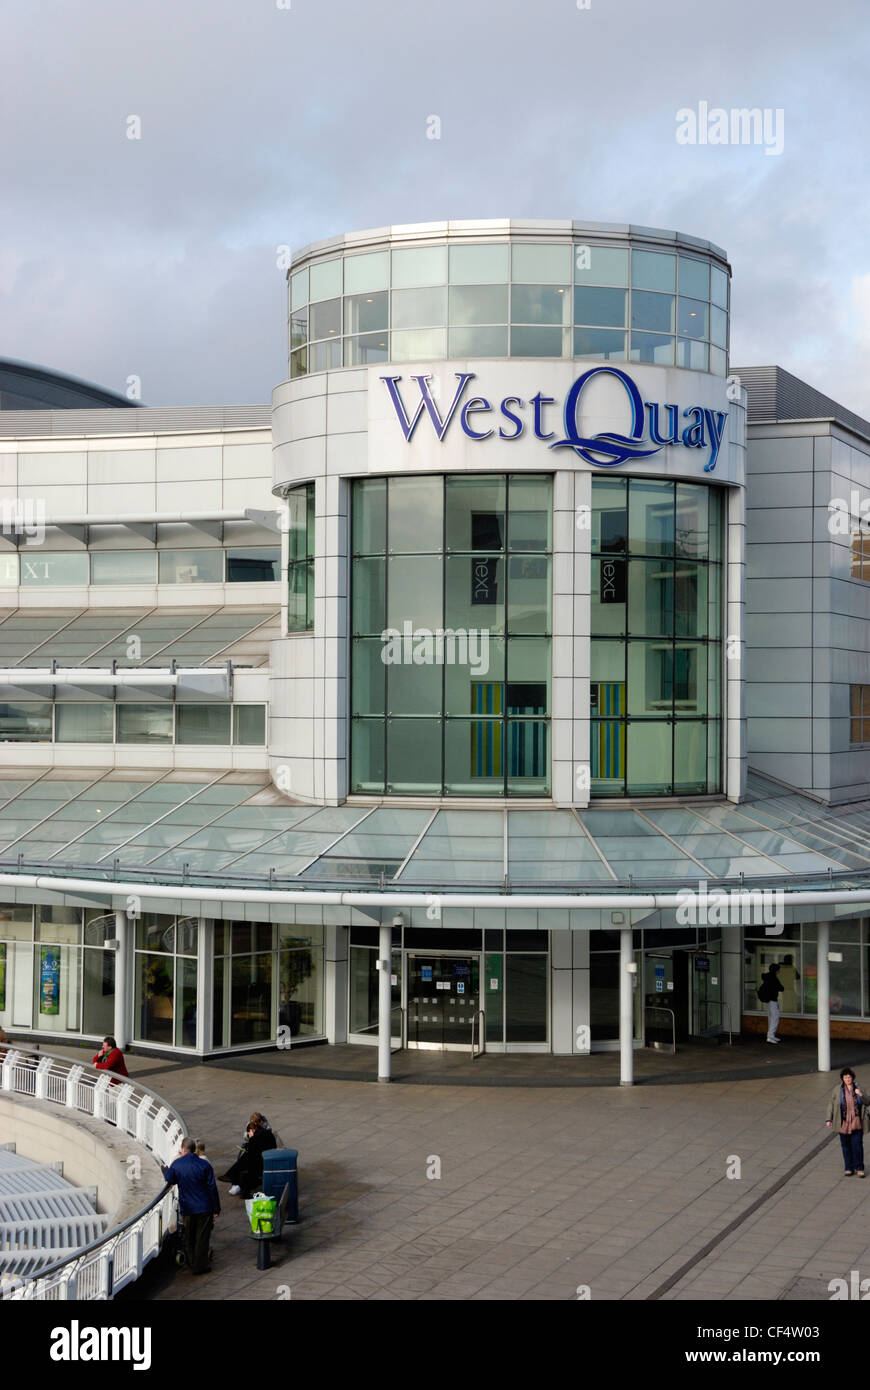 The West Quay Shopping Centre in Southampton. Stock Photo